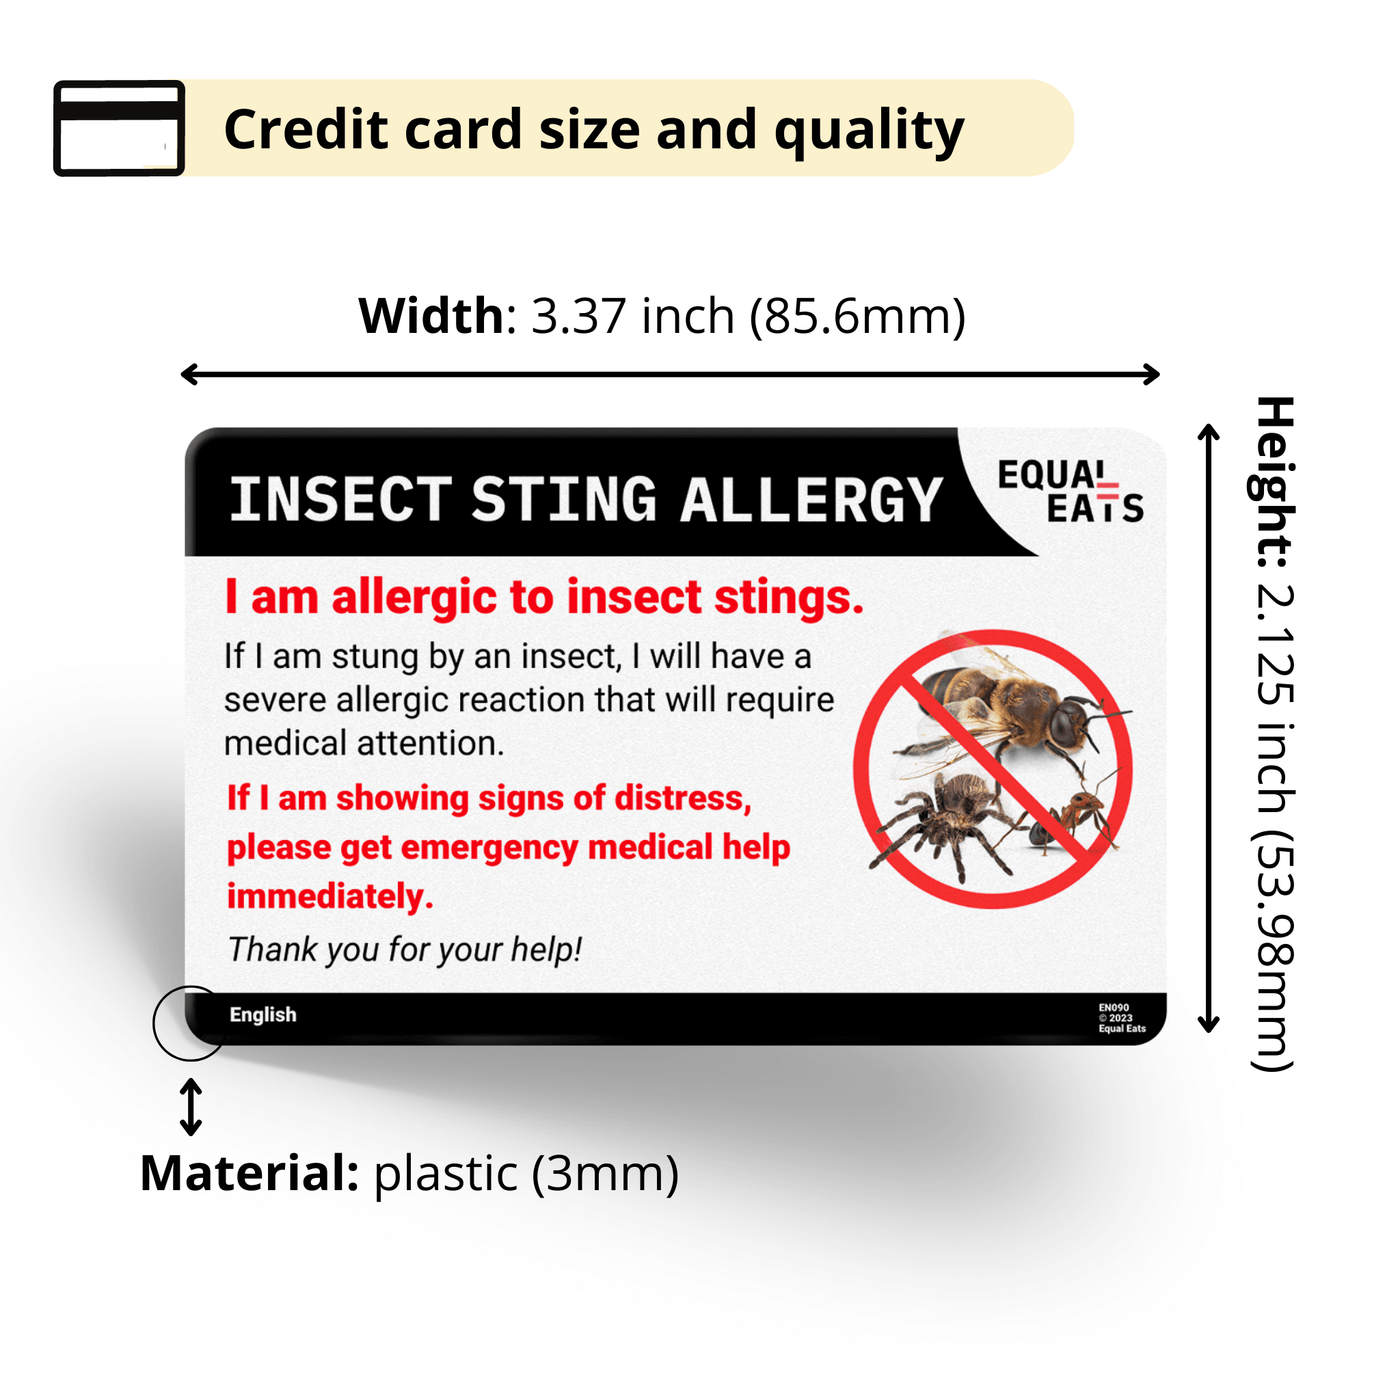 Finnish Insect Sting Allergy Card